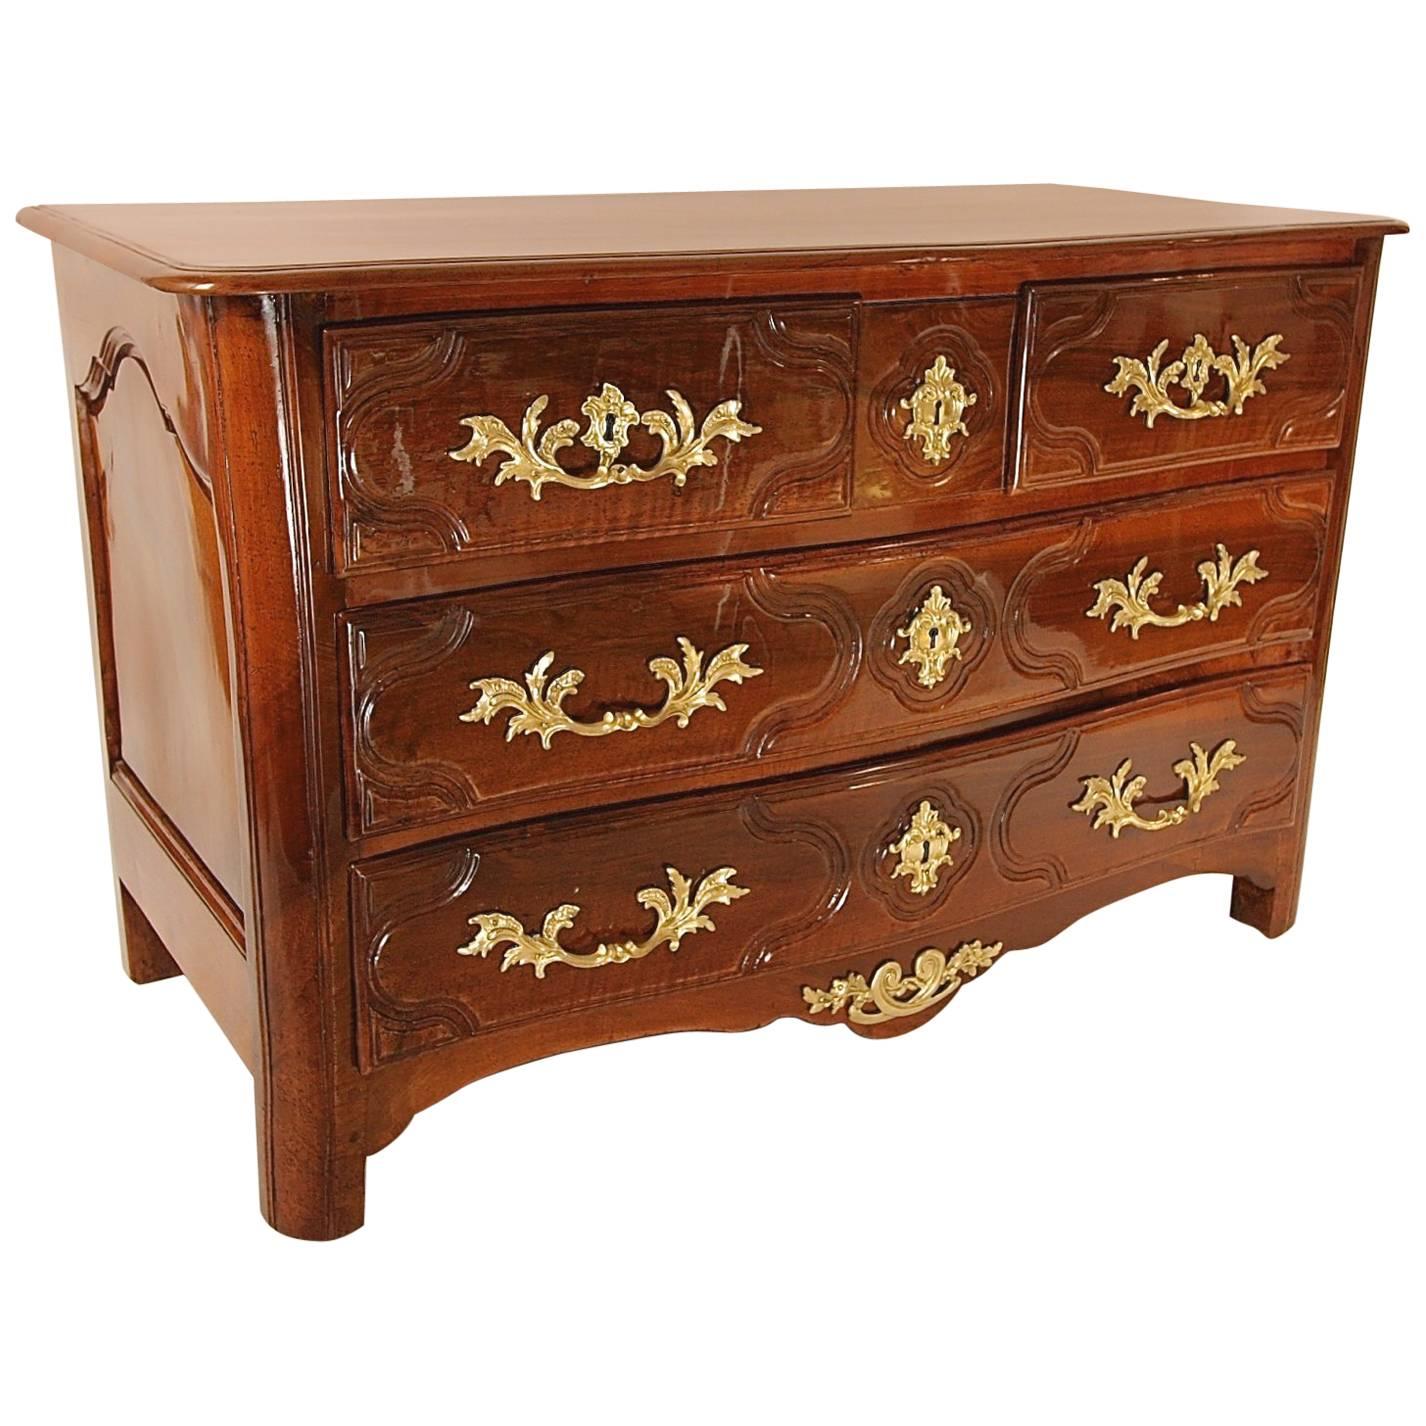 Early 18th Century French Regence Walnut Gilt Bronze Commode For Sale